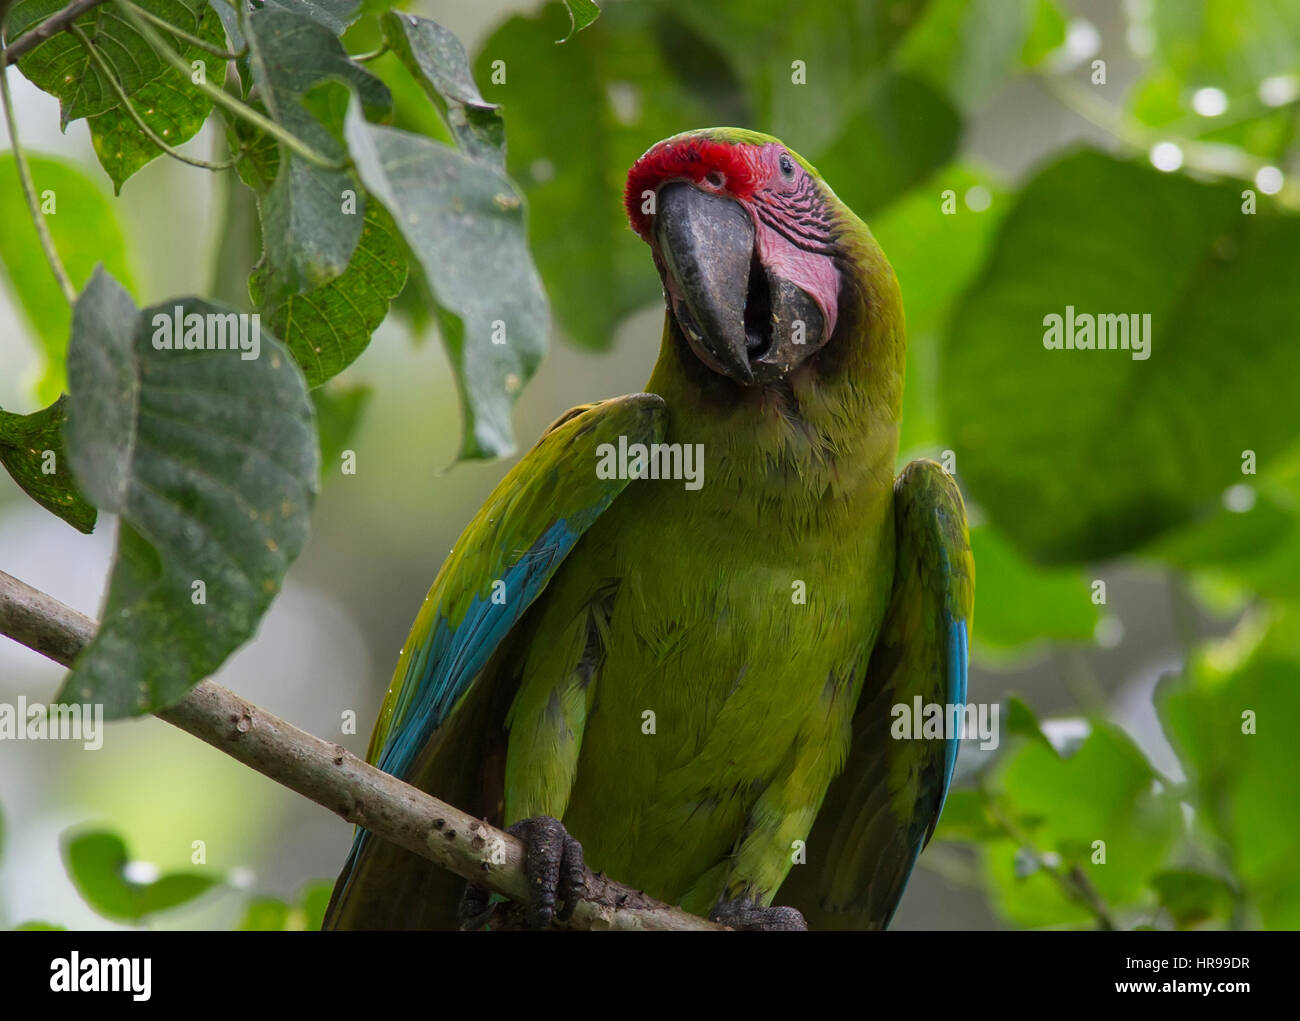 Portrait of a Great Green Macaw Stock Photo